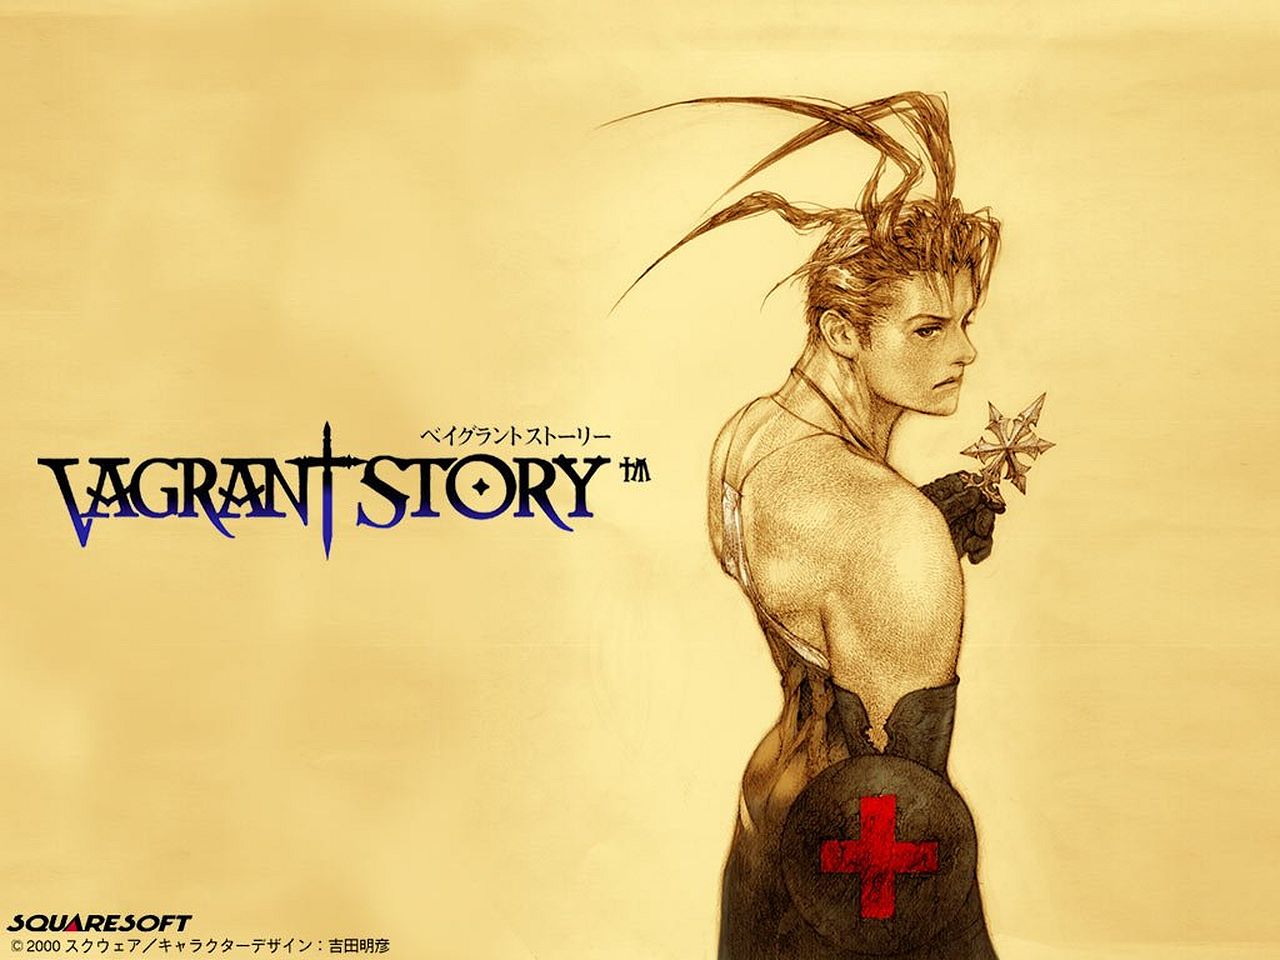 vagrant story, video game